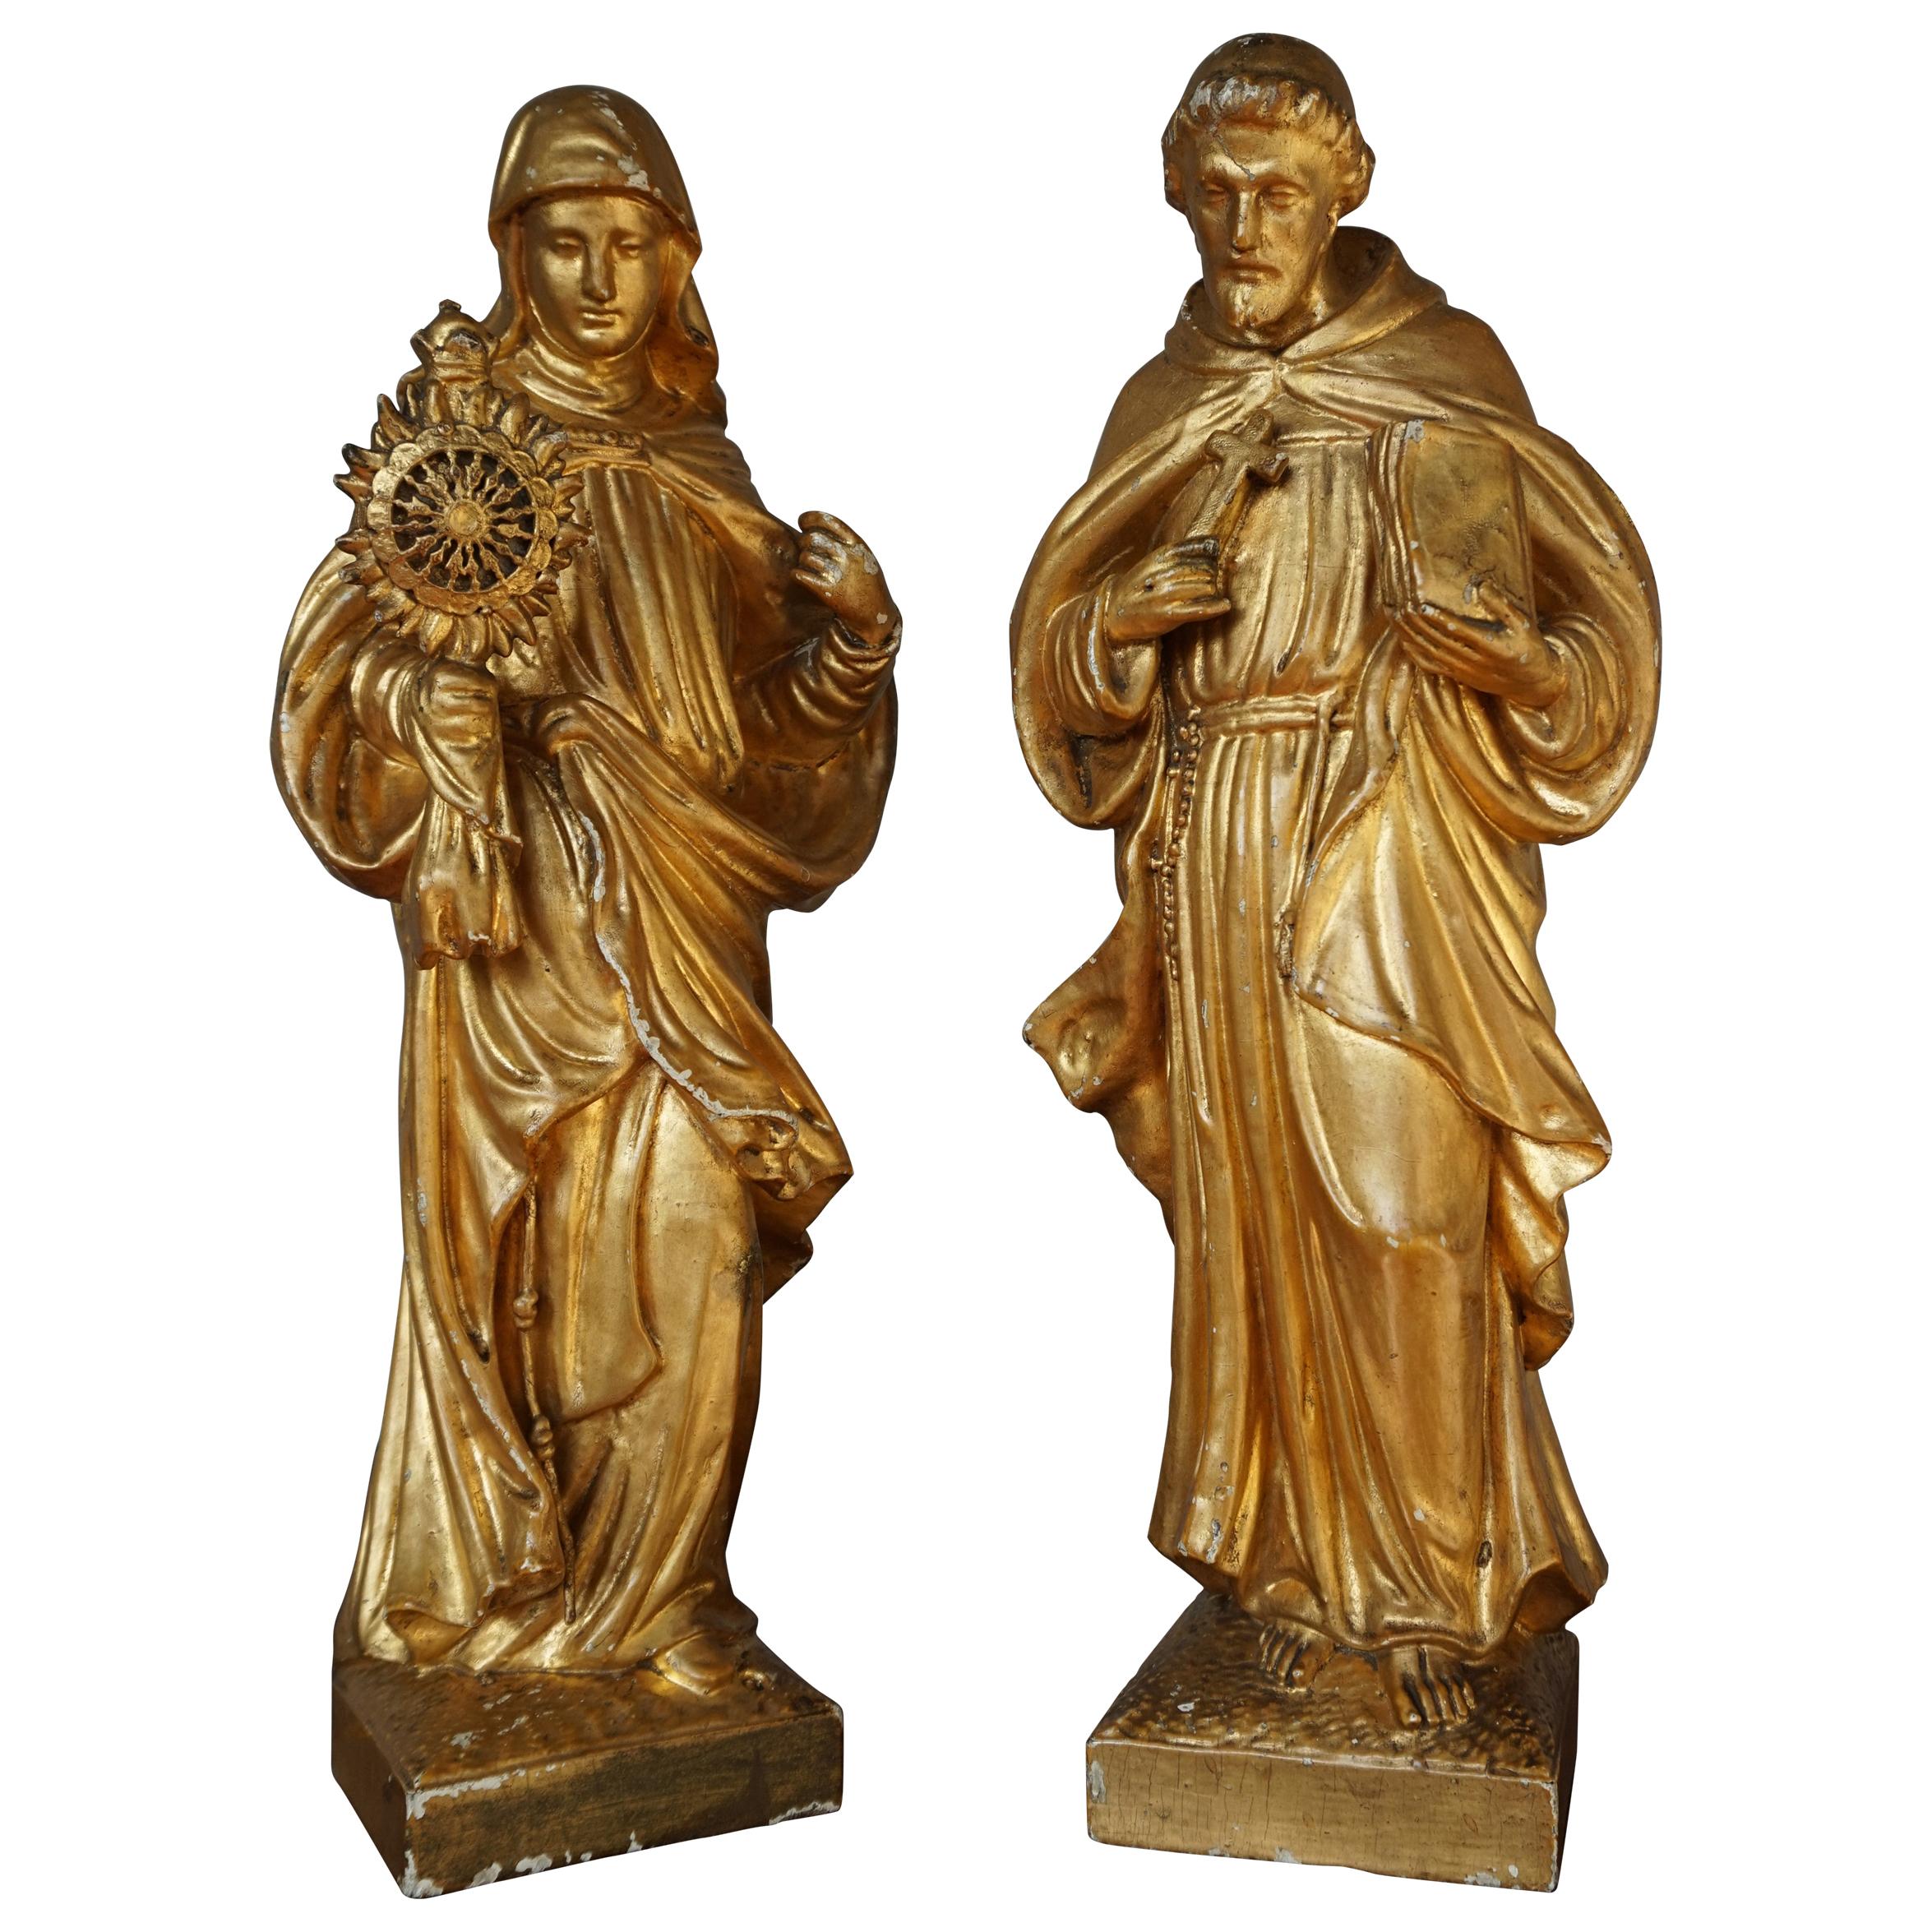 Antique Hand Carved Gilt Wooden Church Statue of Saint Francis & Clare of Assisi